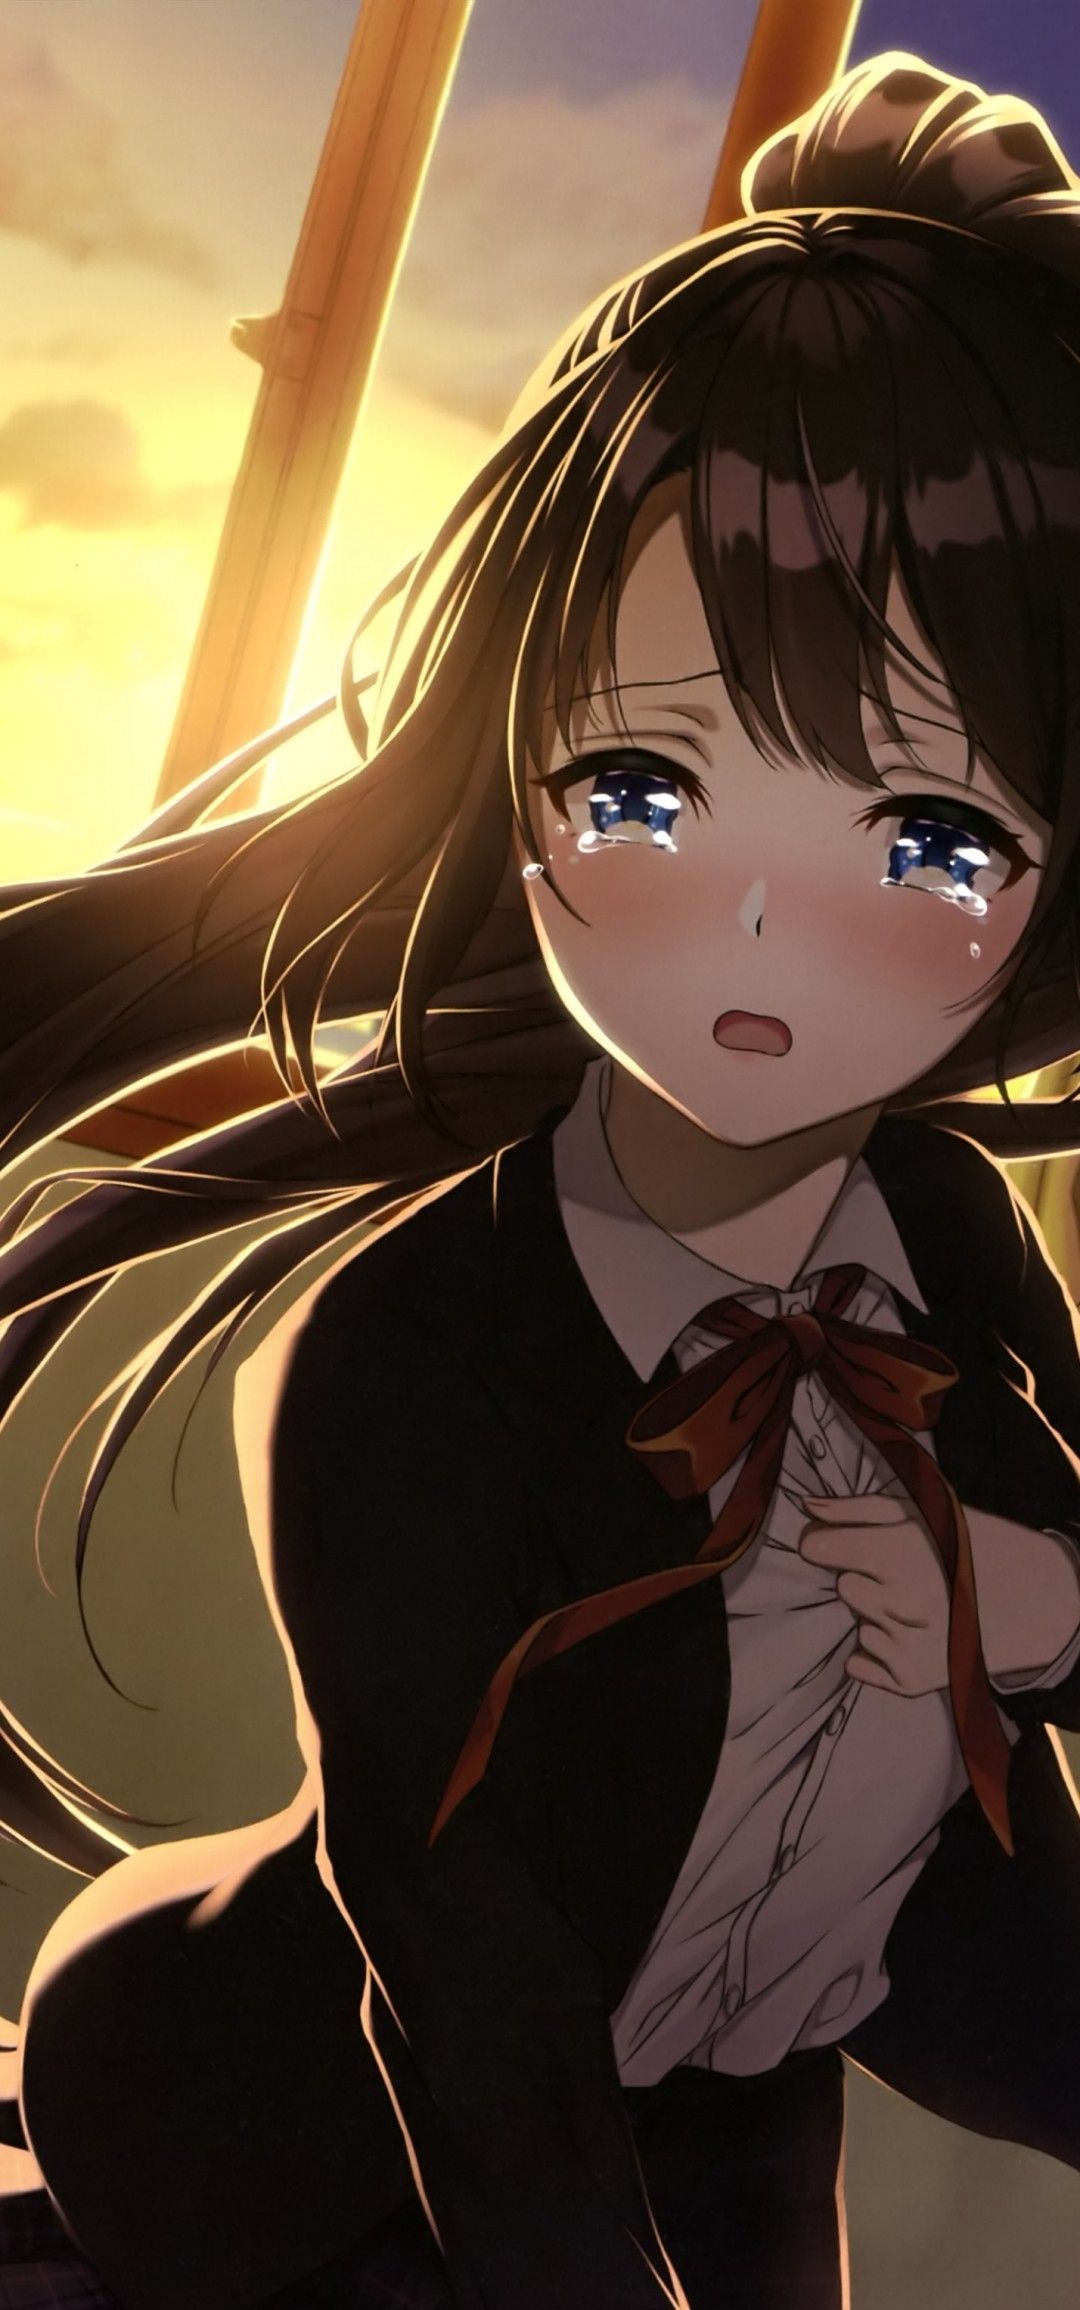 Download 1080x2310 Anime Girl, Crying, Classroom, Sad Face, Brown Hair, School Uniform, Sunset Wallpaper for Honor View 20